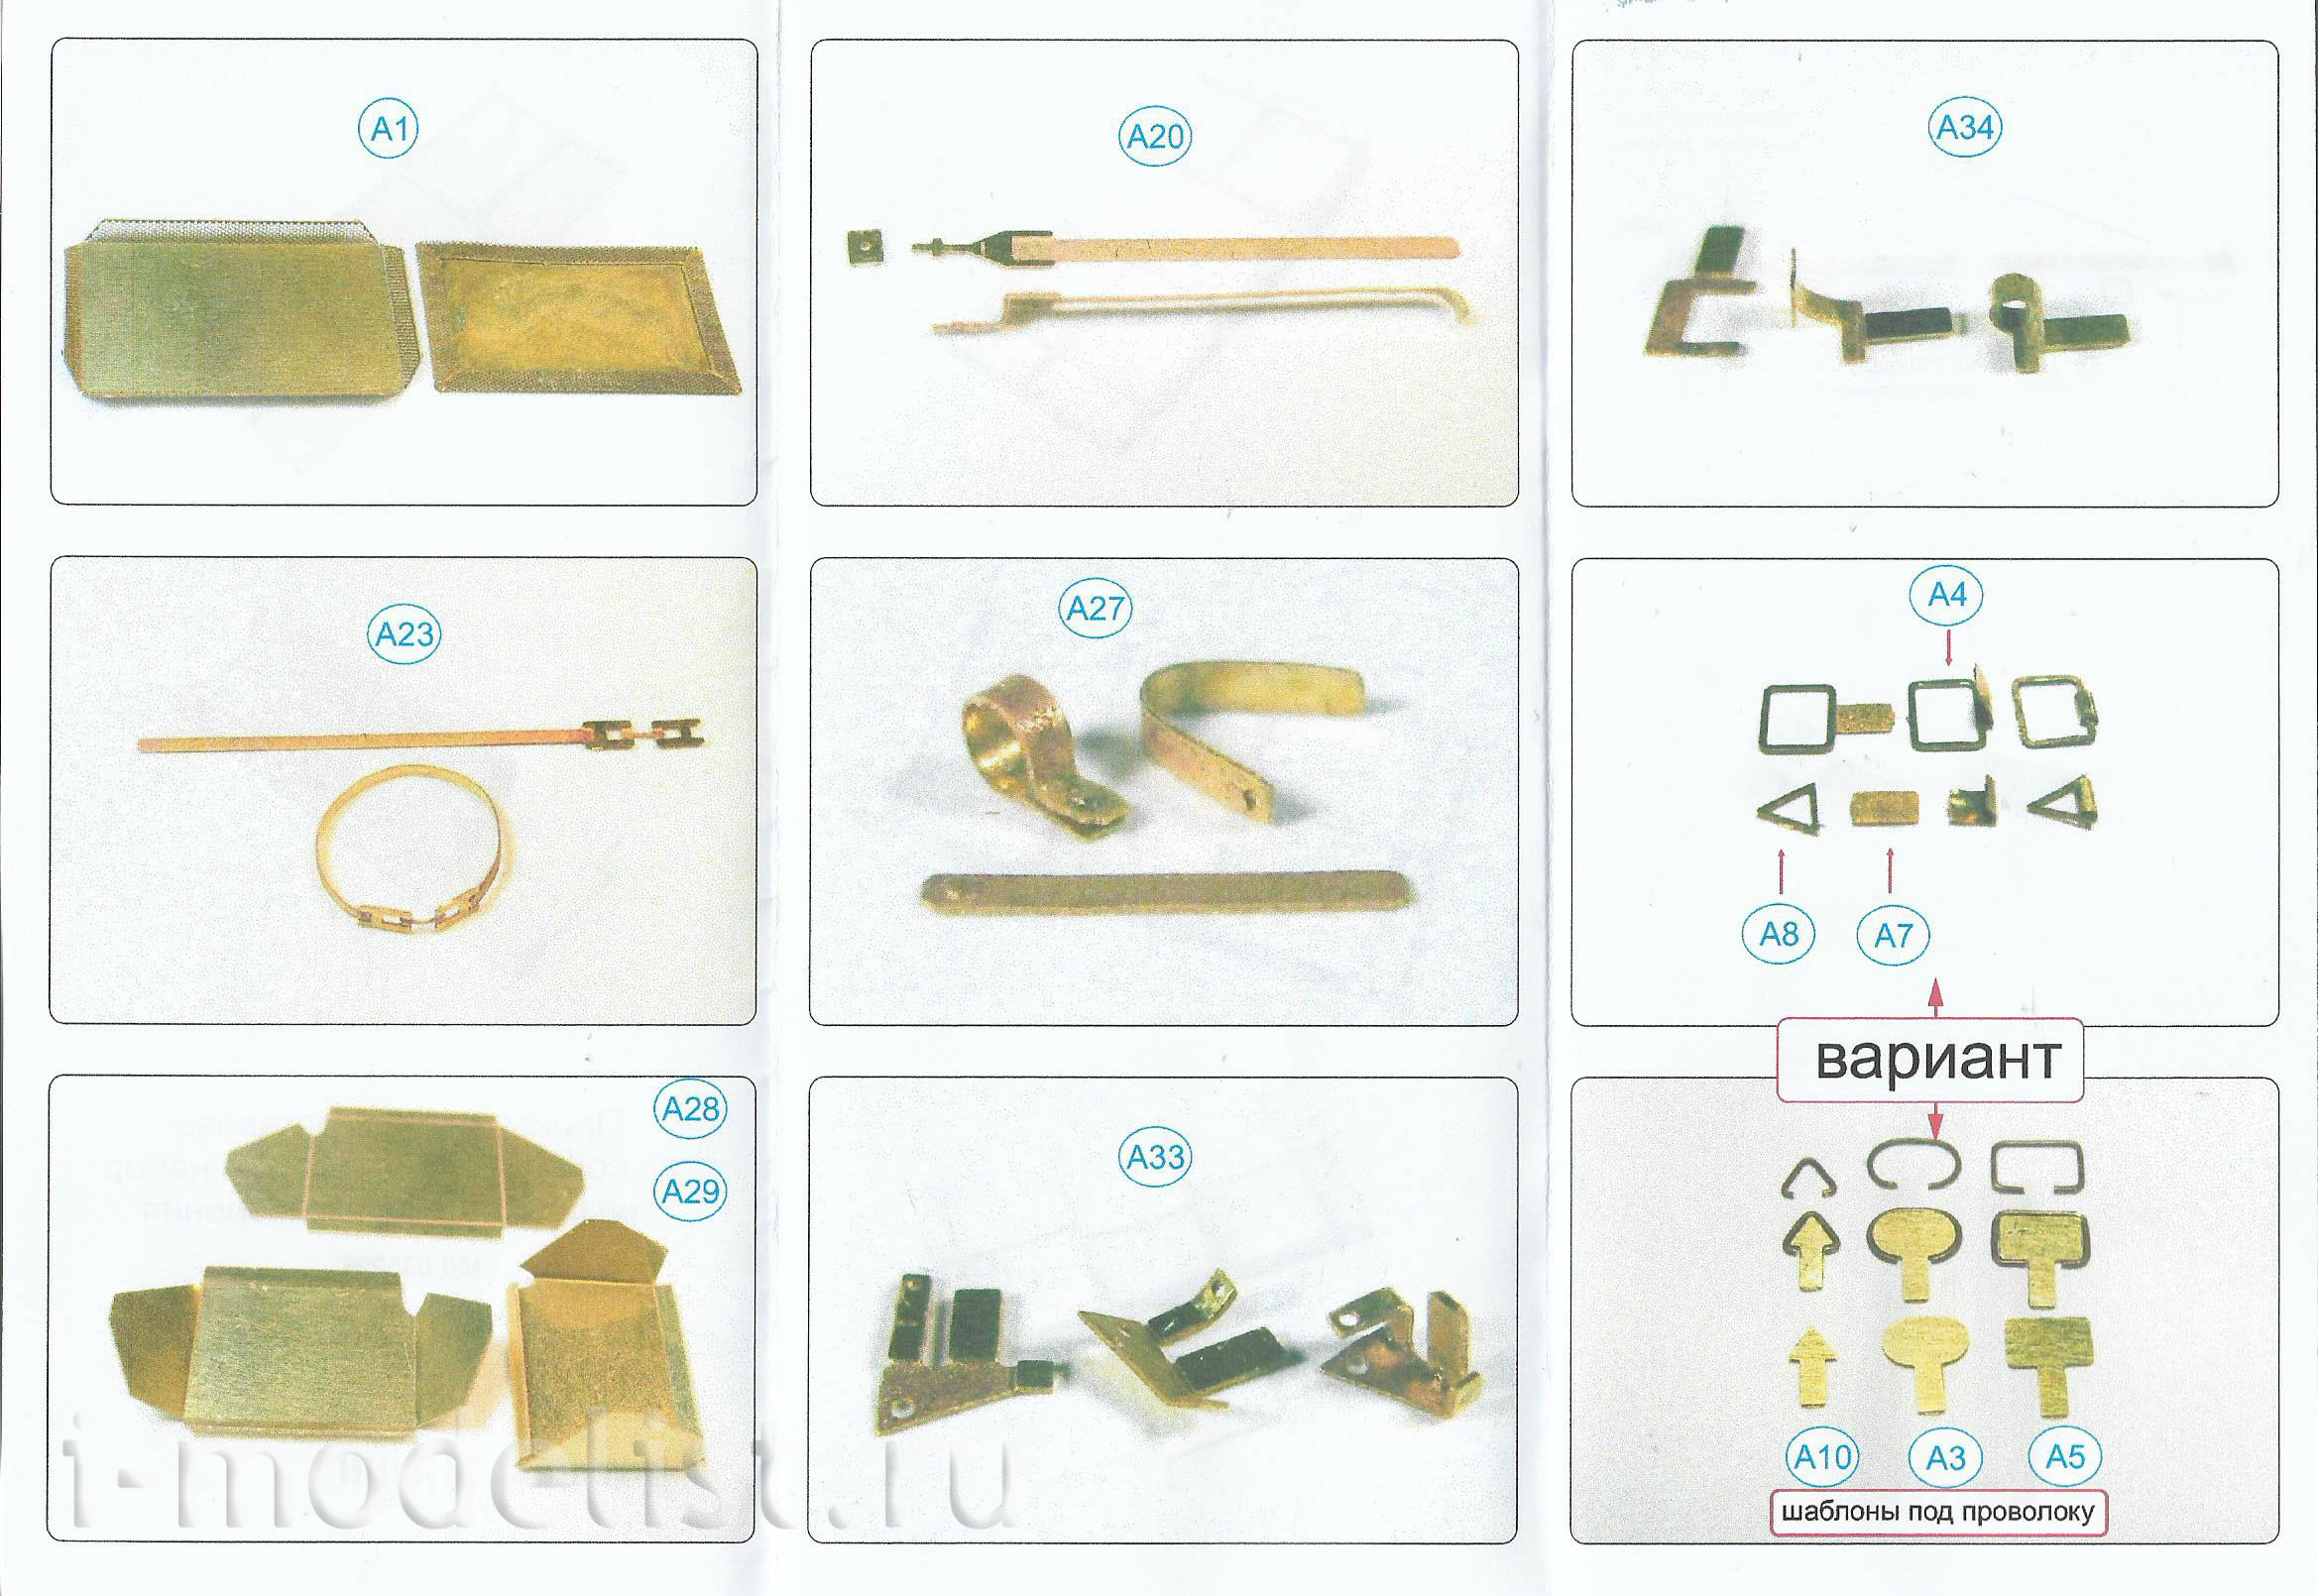 035226 Microdesign 1/35 Kit of photo-etched parts for 